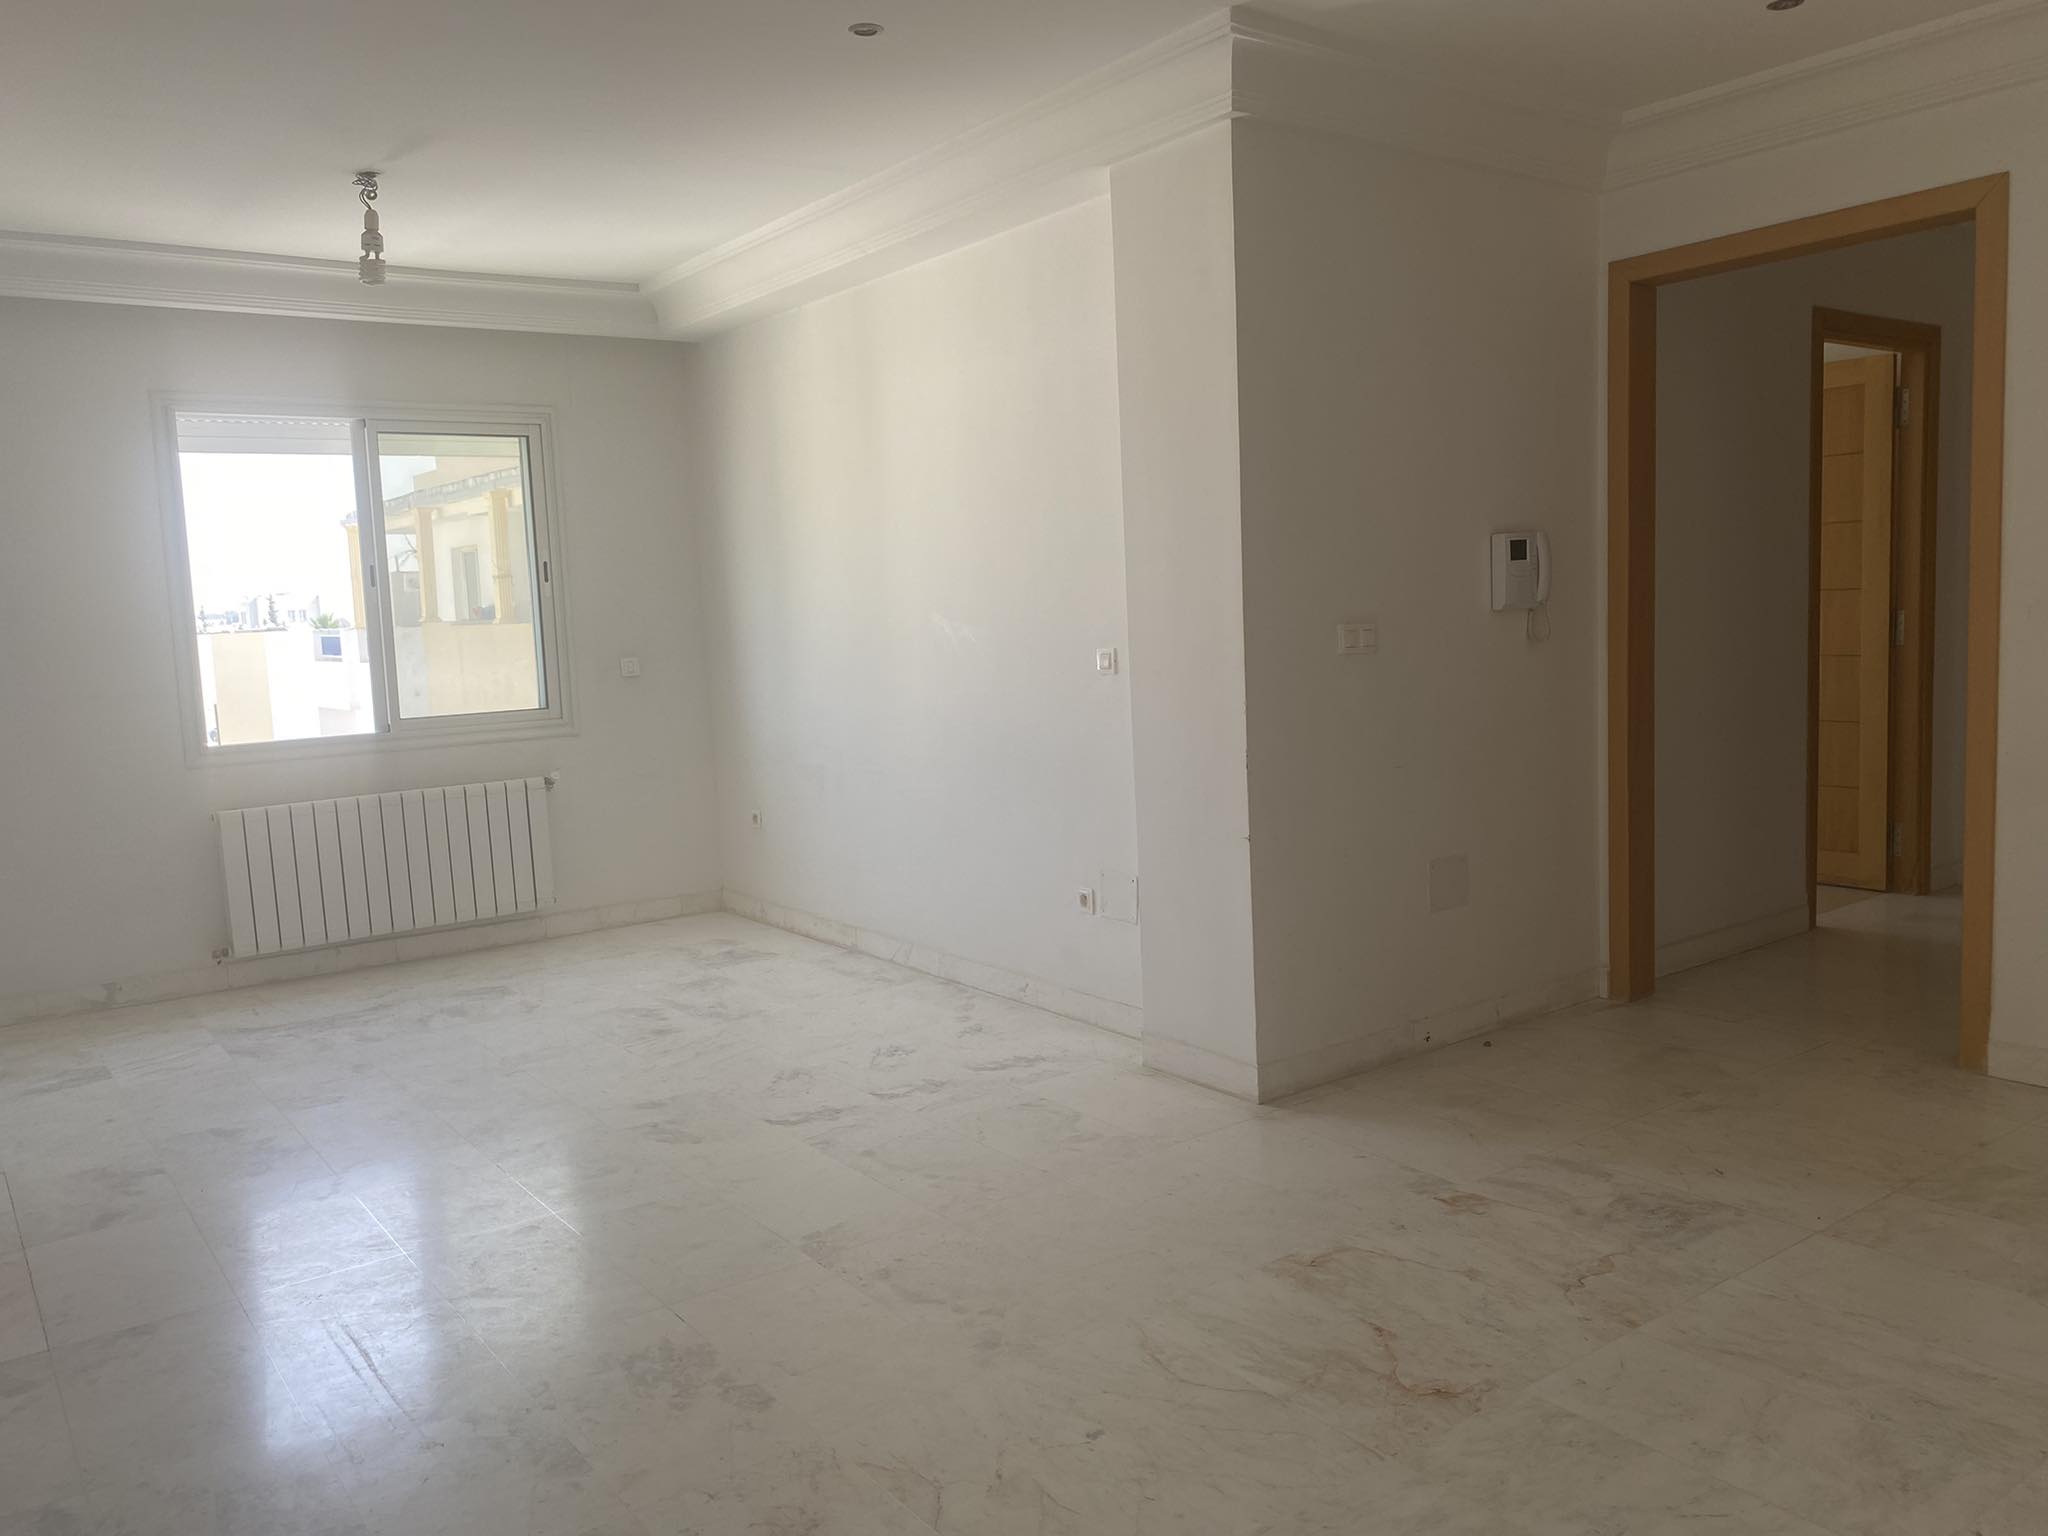 Raoued Cite El Ghazala 1 Location Appart. 3 pices Appartement s2